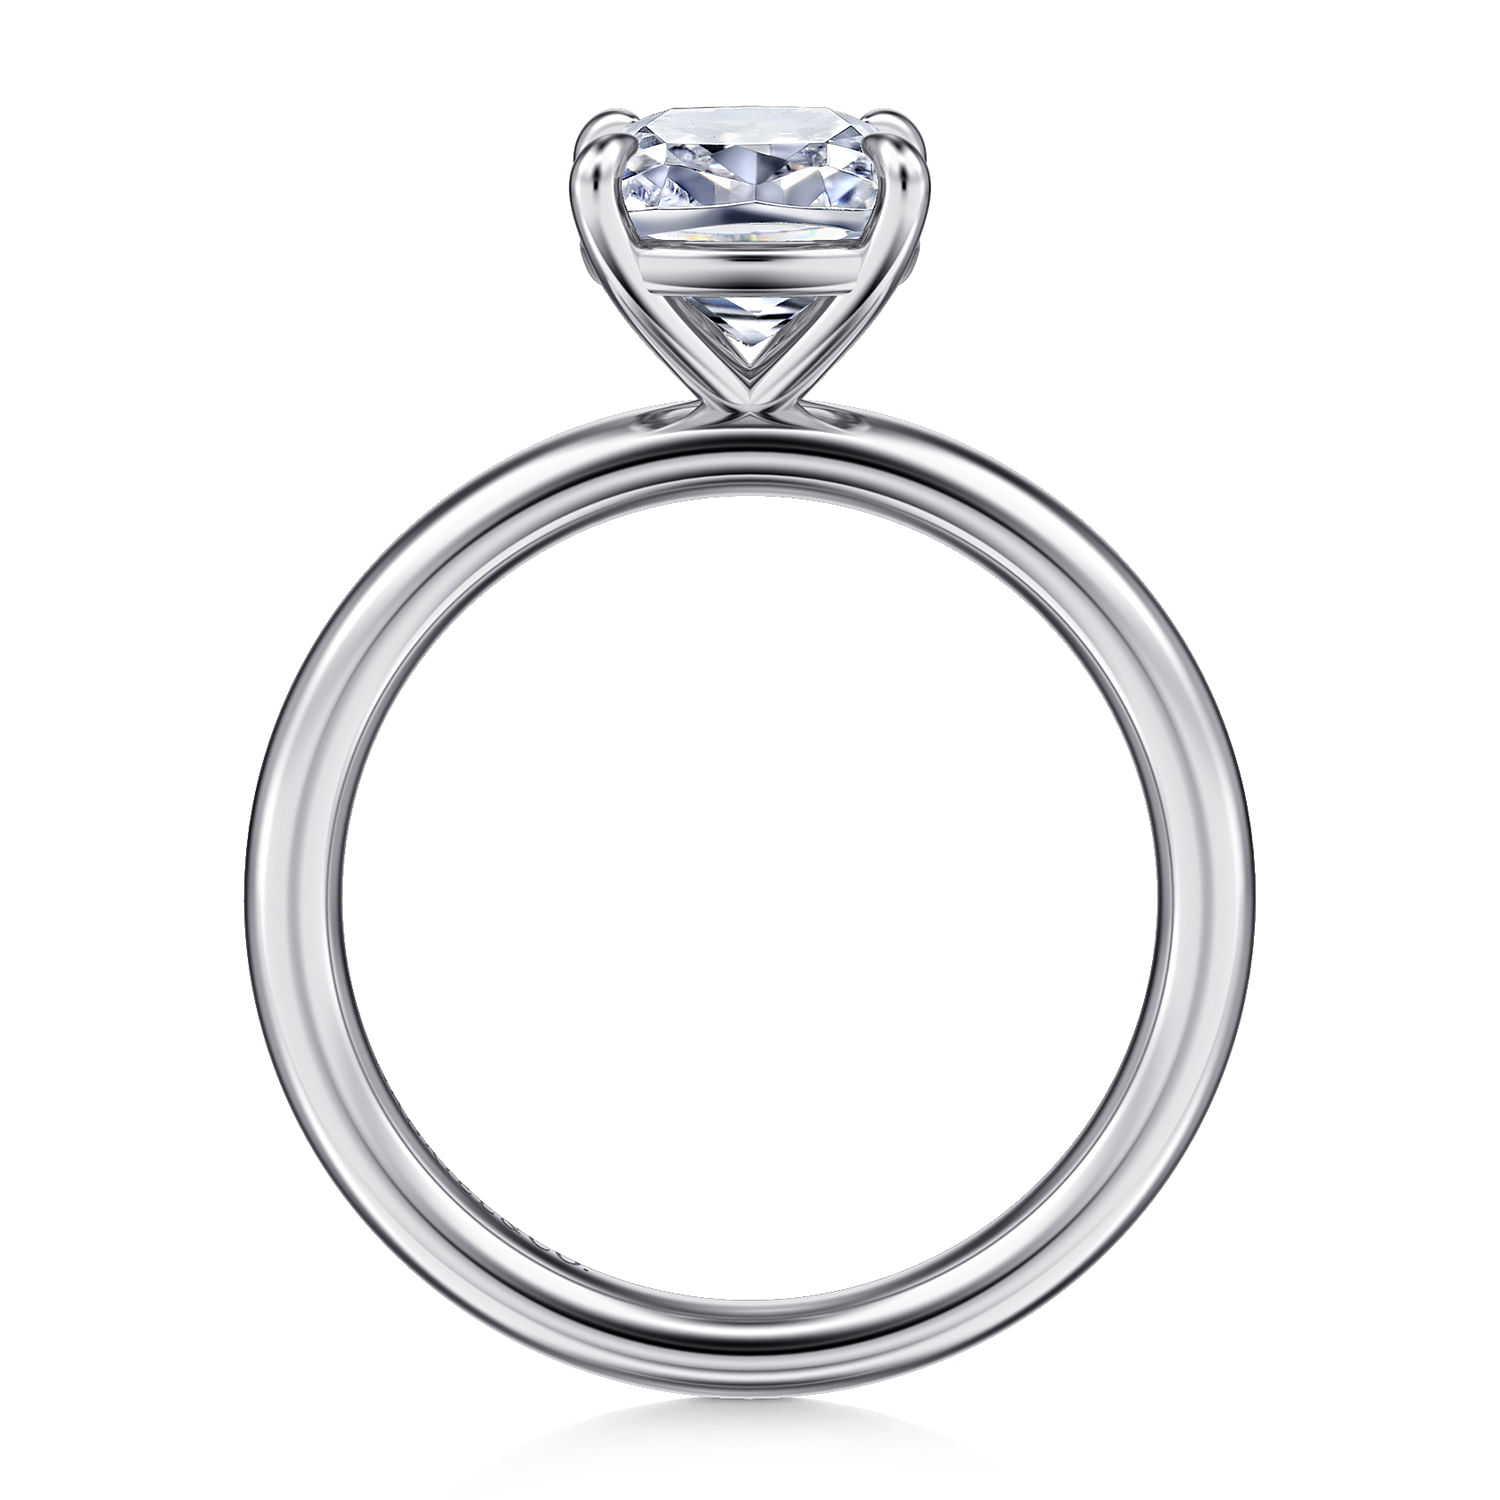 14K White Gold Cushion Cut Solitaire Engagement Ring